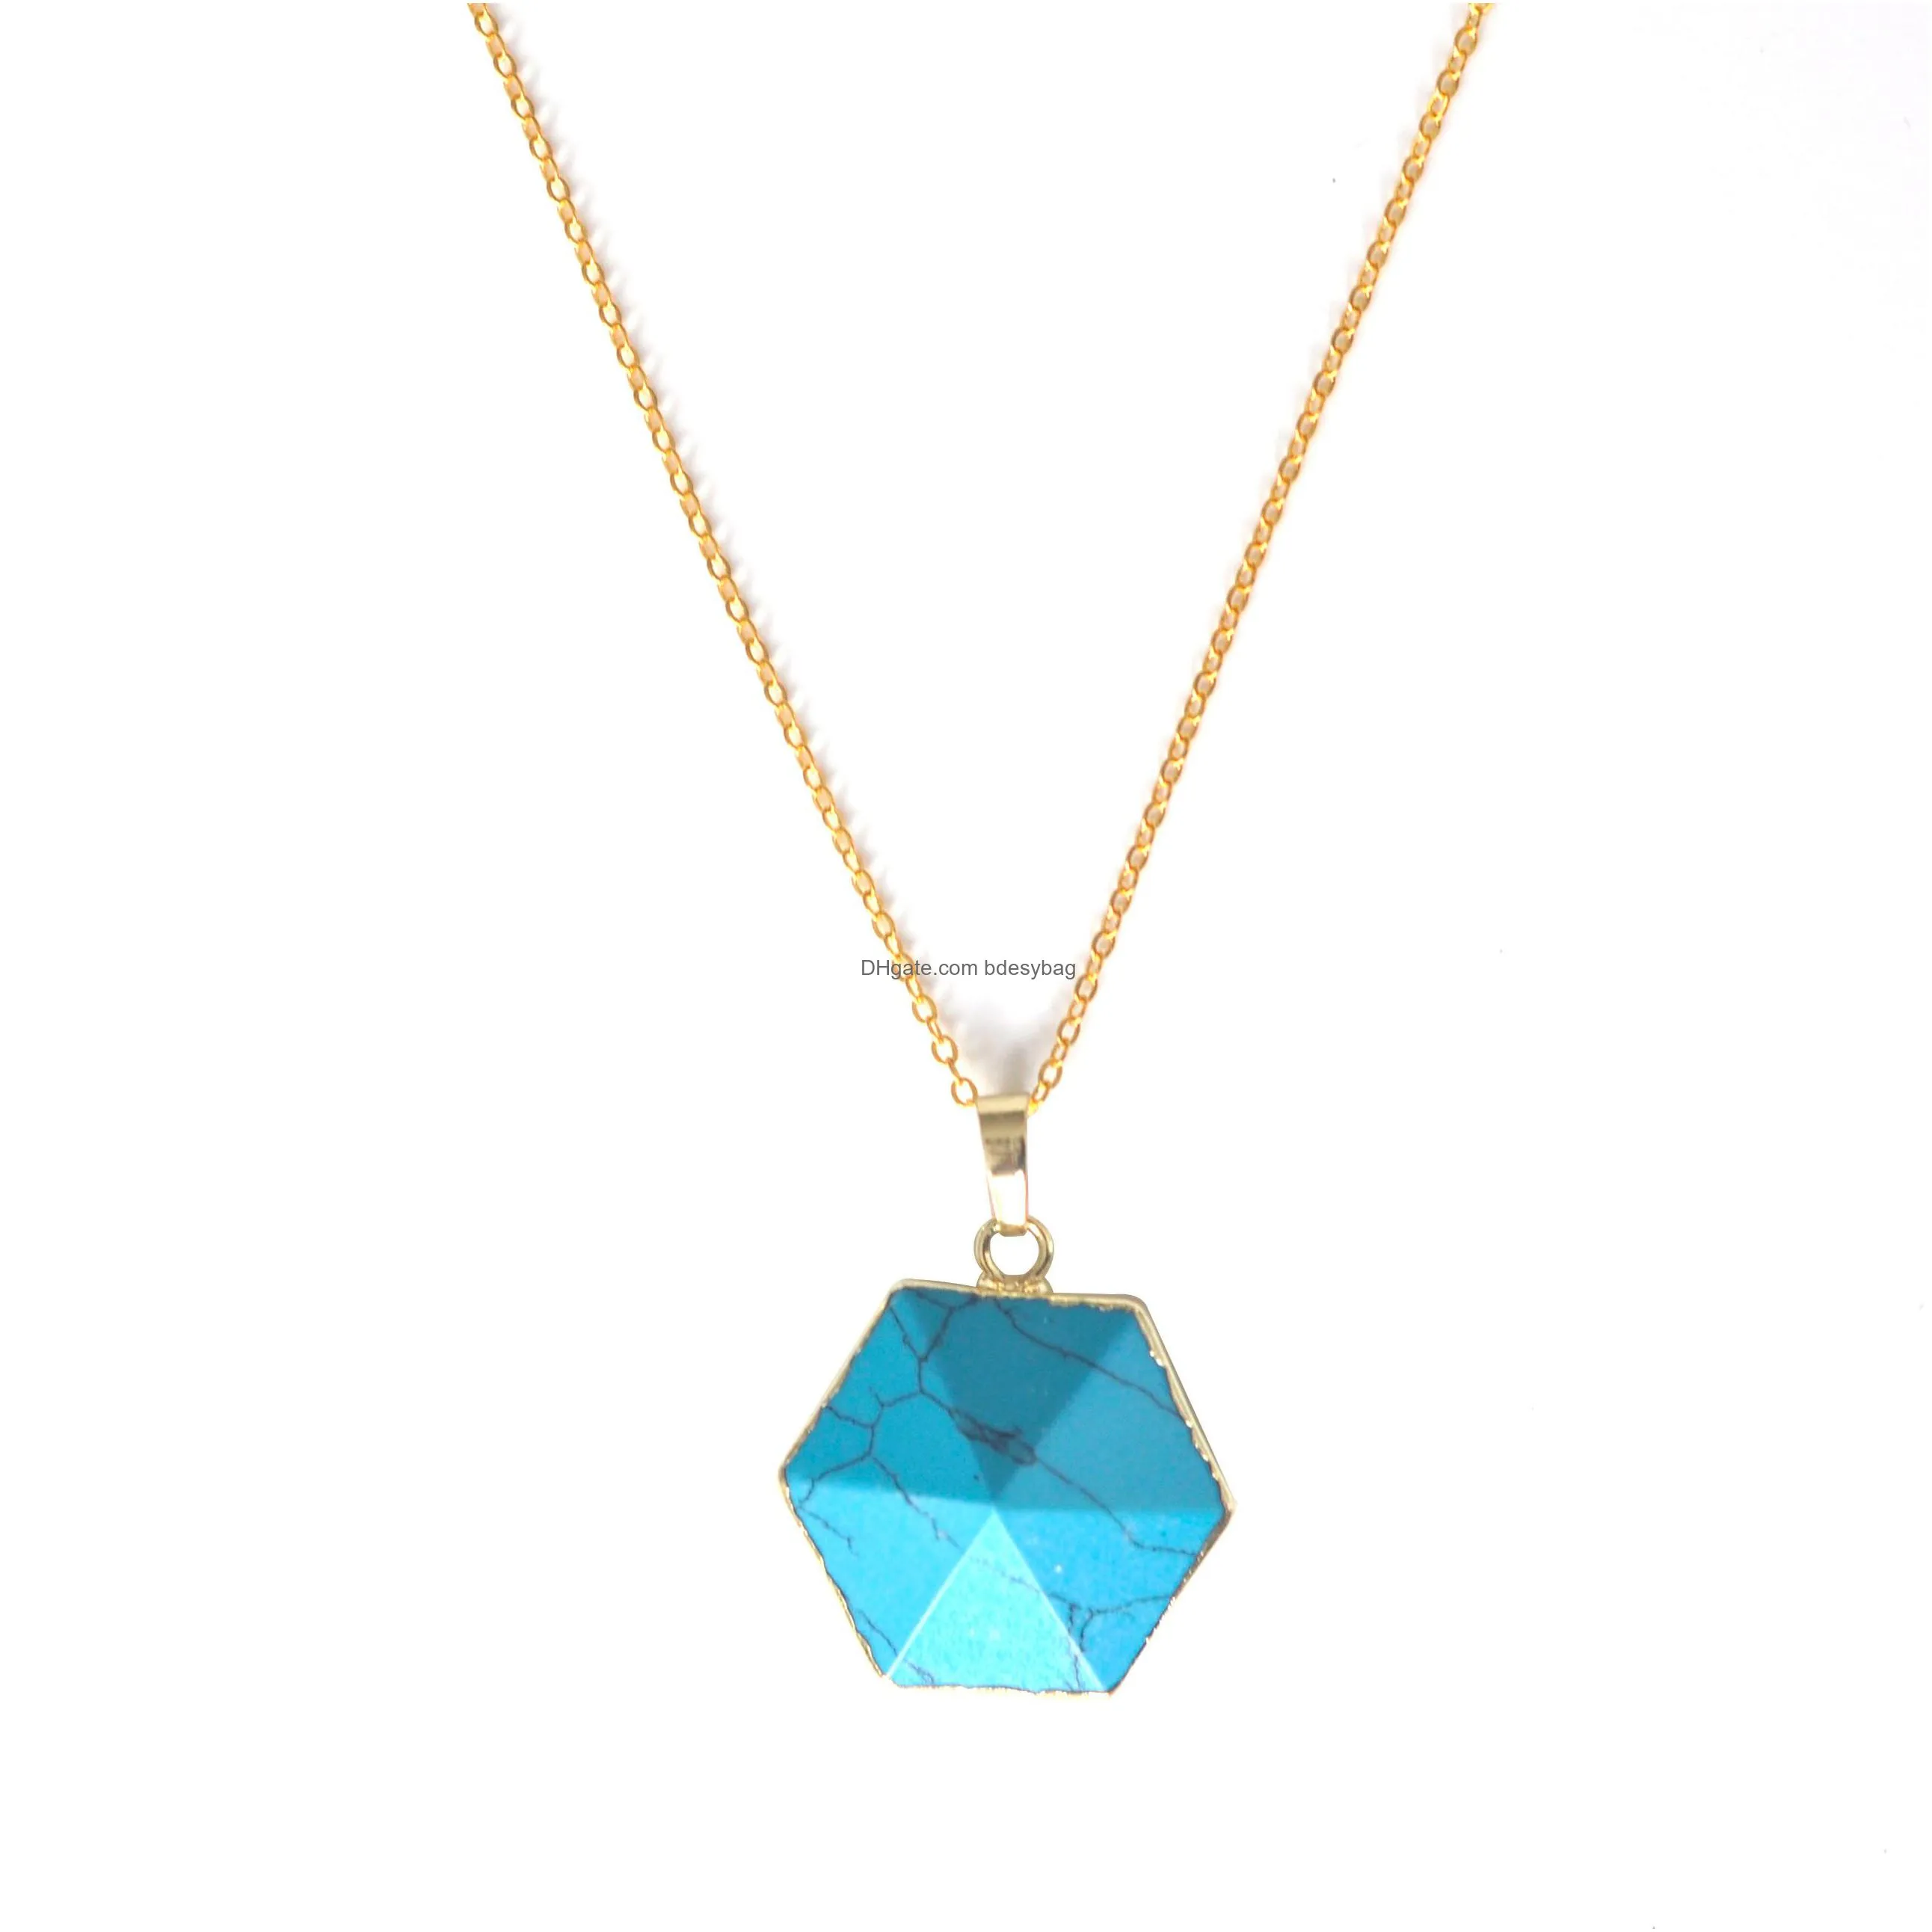 hexagonal pyramid crystal necklace pendant necklaces charm luminous alloy stone in the dark gift for girls and woman